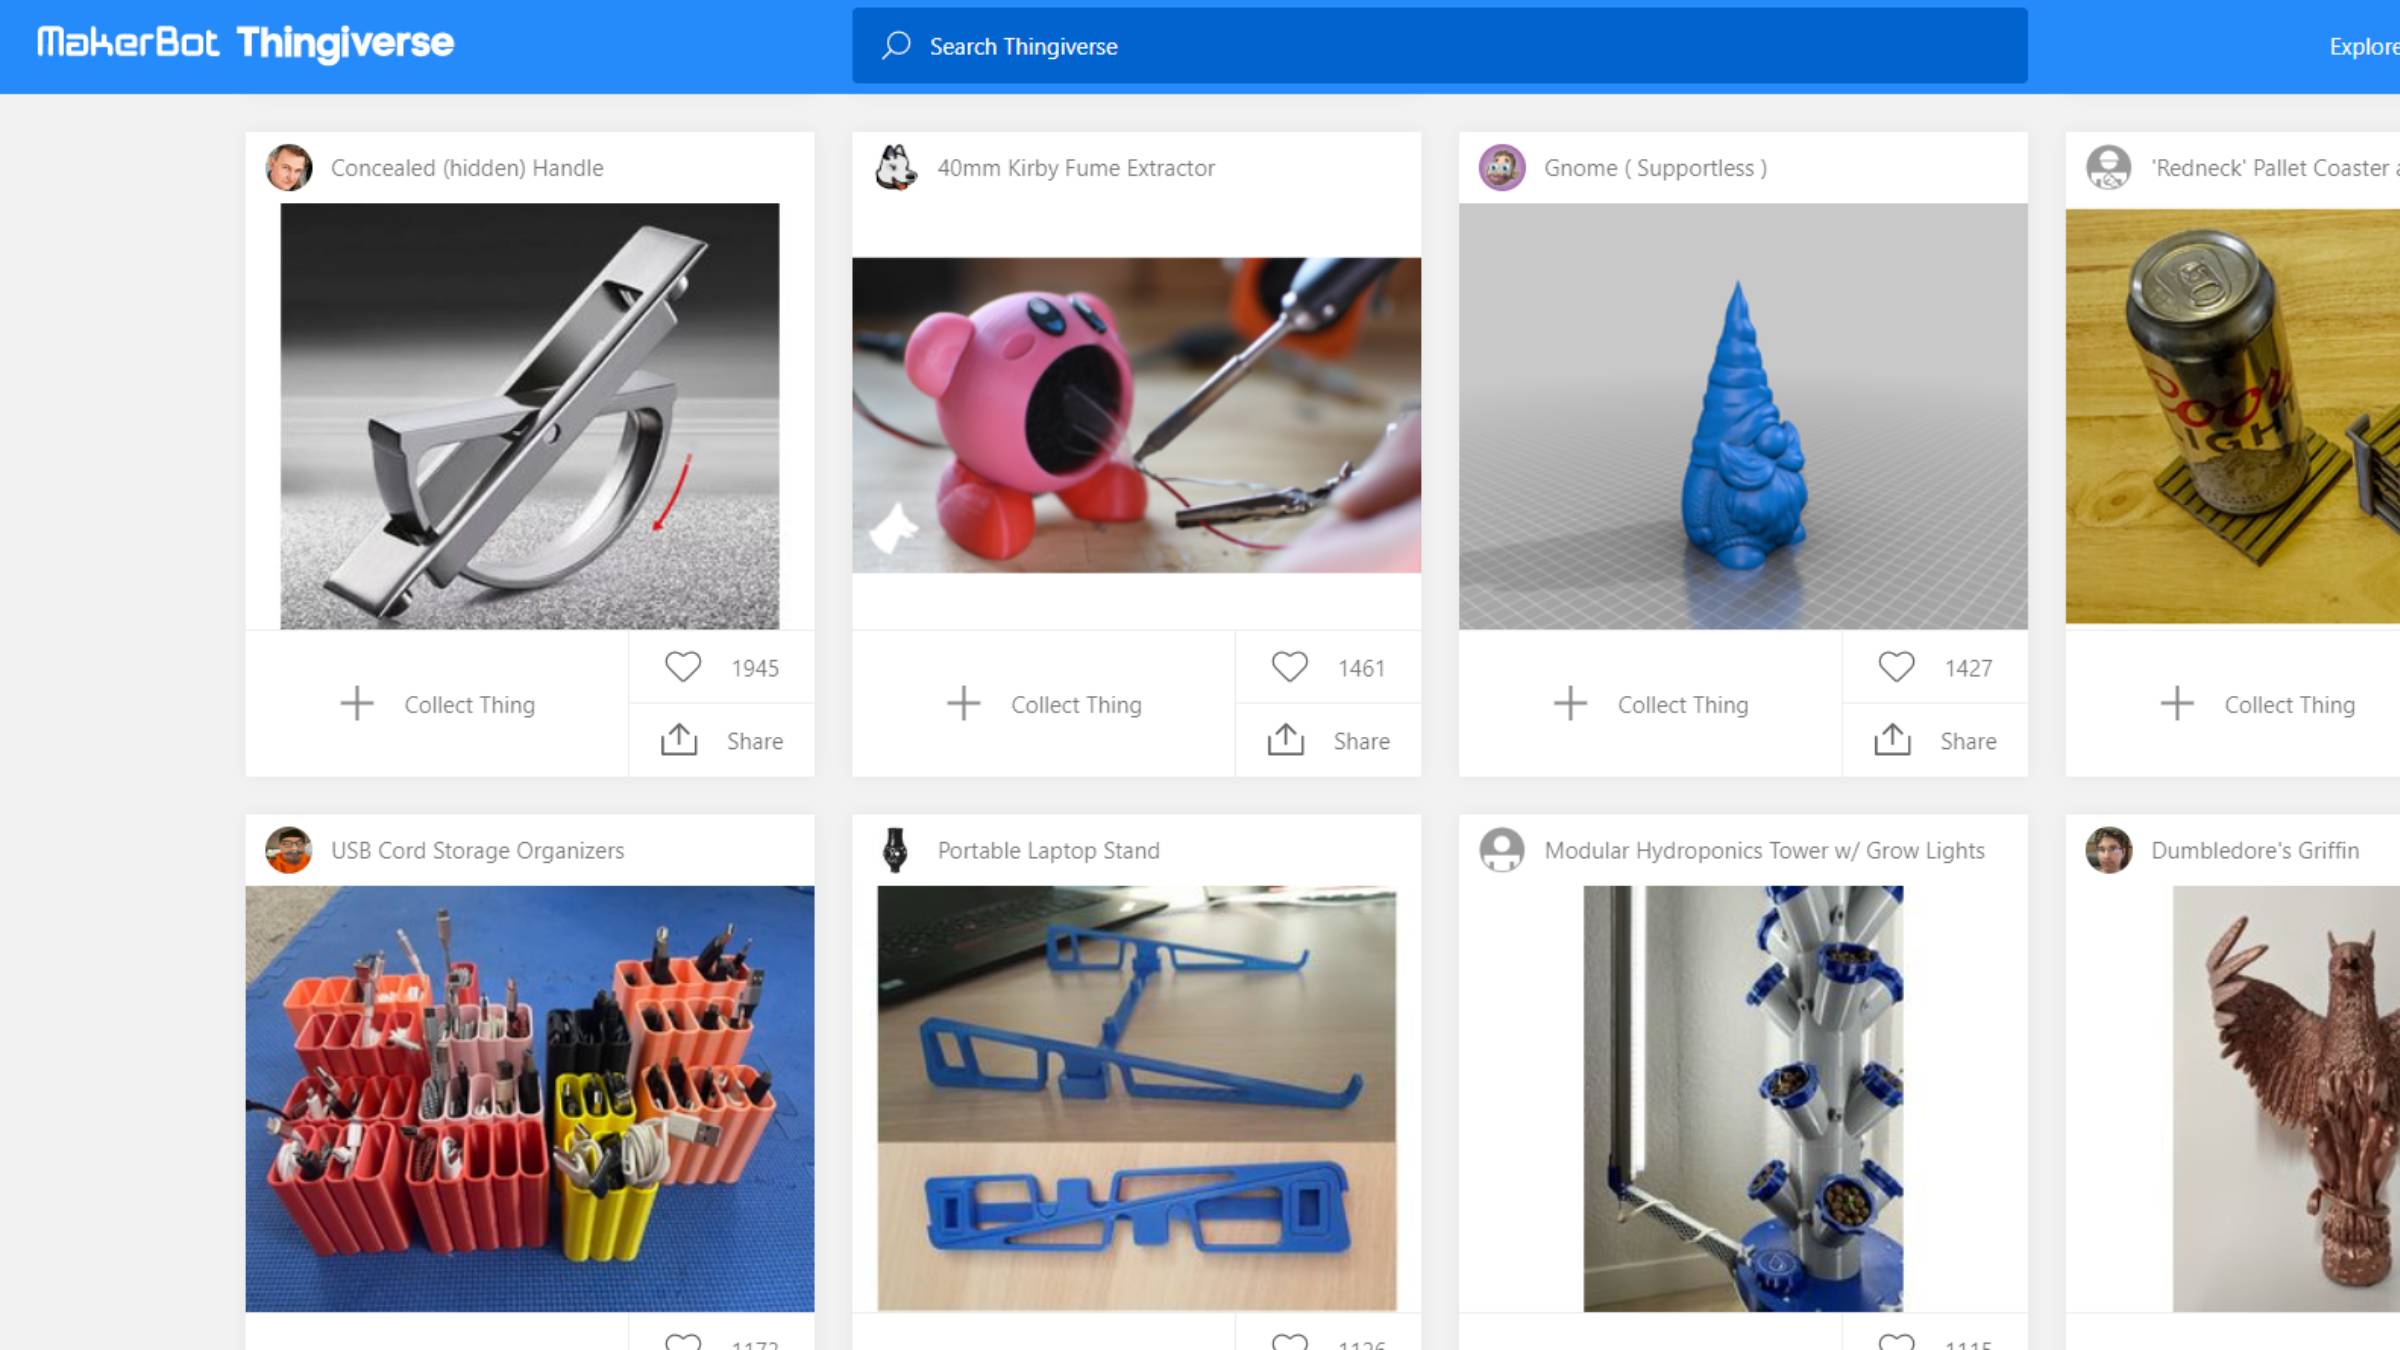 thingiverse overview with objects to 3d print with different rights